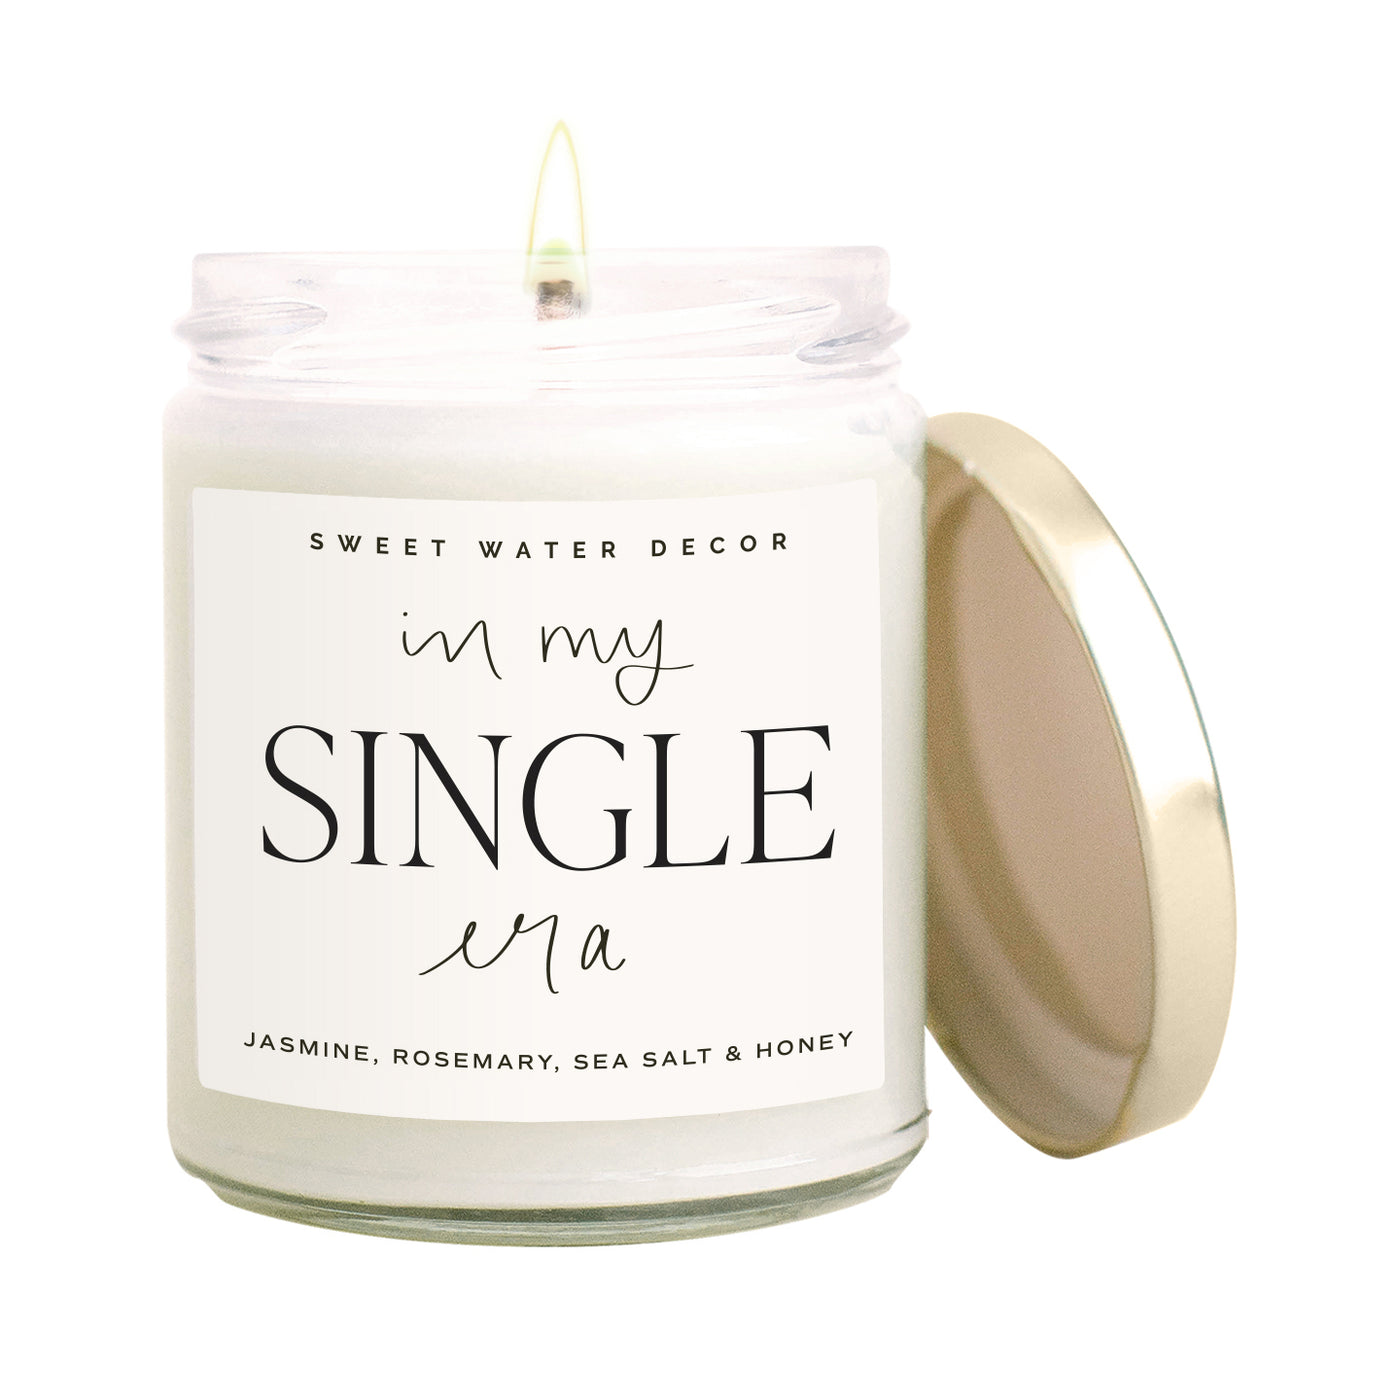 In My Single Era Soy Candle - Clear Jar - 9 oz - Sweet Water Decor - Candles